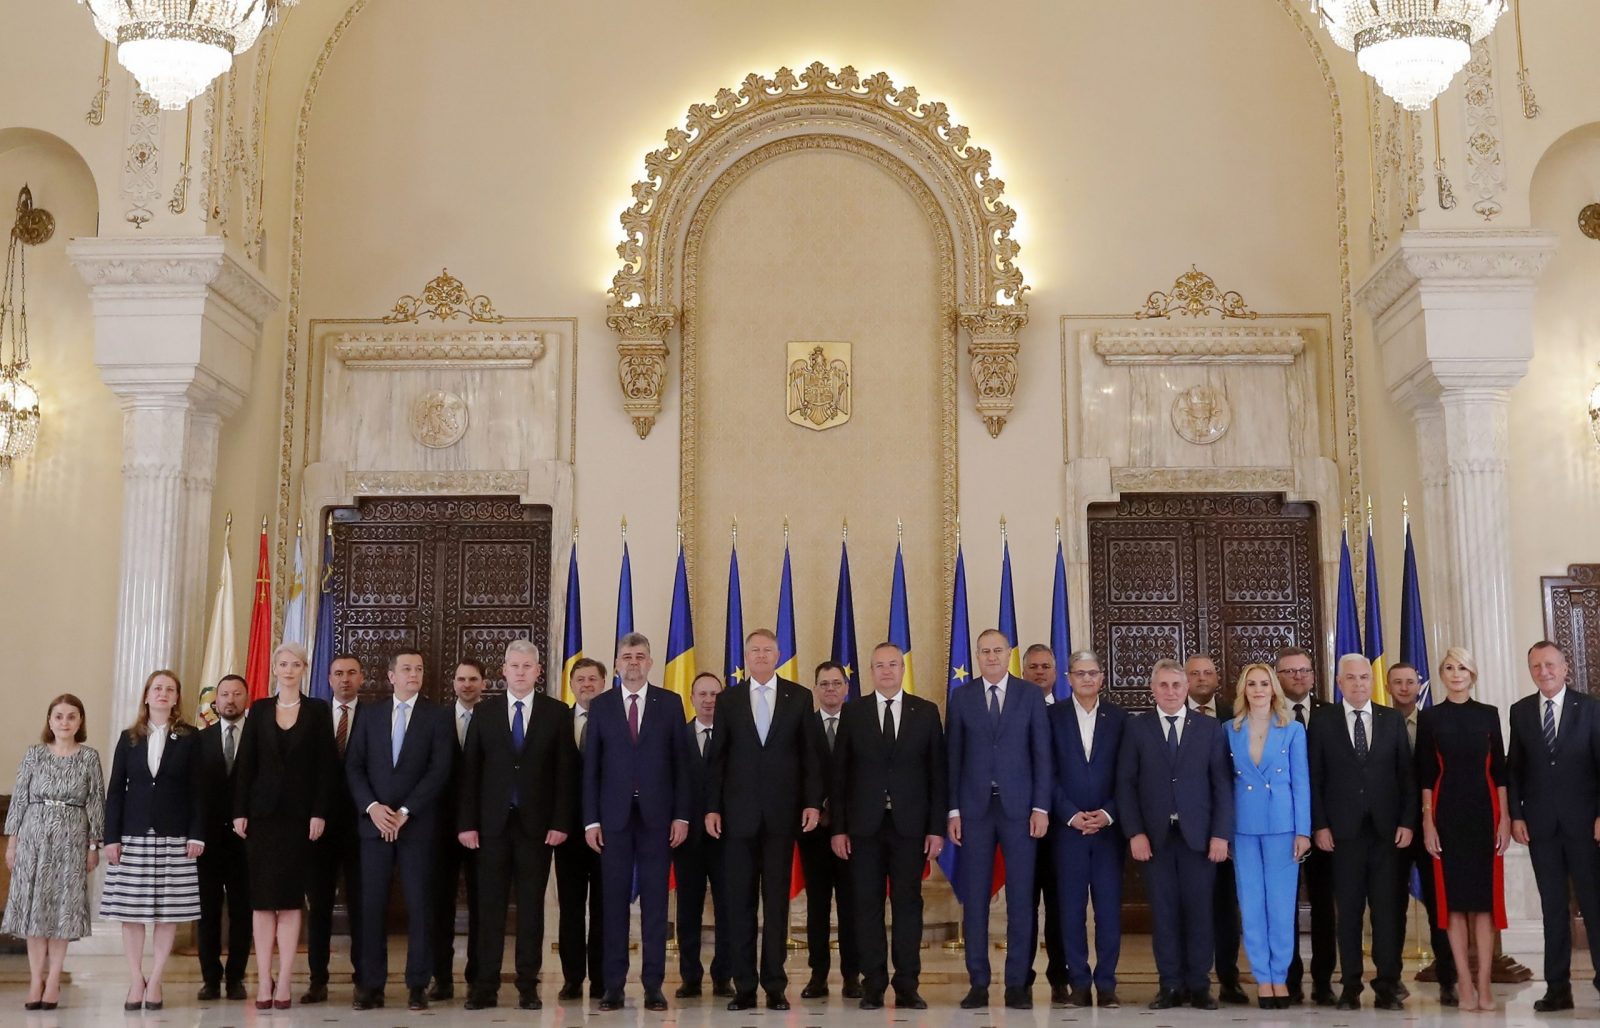 epa10692866 Romania's new Prime Minister Marcel Ciolacu (C-L), Senate's President Nicoale Cicua (C-R), Romania's President Klaus Iohannis (C, with grey tie) and all cabinet members pose for a group photo after the swearing in ceremony held at the Presidential Palace in Bucharest, Romania, 15 June 2023. Romanian President Iohannis announced on 13 June that he appointed PSD (Social Democratic Party) party leader Marcel Ciolacu as prime minister-designate to form a new government team. The ruling coalition (National Coalition for Romania) formed by the PSD (Social Democratic Party), PNL (National Liberal Party) and UDMR (Democratic Alliance of Hungarians in Romania) parties in 2021 agreed a political protocol to rule by rotating the Prime Ministers. Leader of the Social Democratic Party Marcel Ciolacu was until now the President of the Chamber of Deputies of the Romanian Parliament. Ciolacu's cabinet passed the confidence vote with 290 ballots, the minium requirement being 234 for passing.  EPA/ROBERT GHEMENT